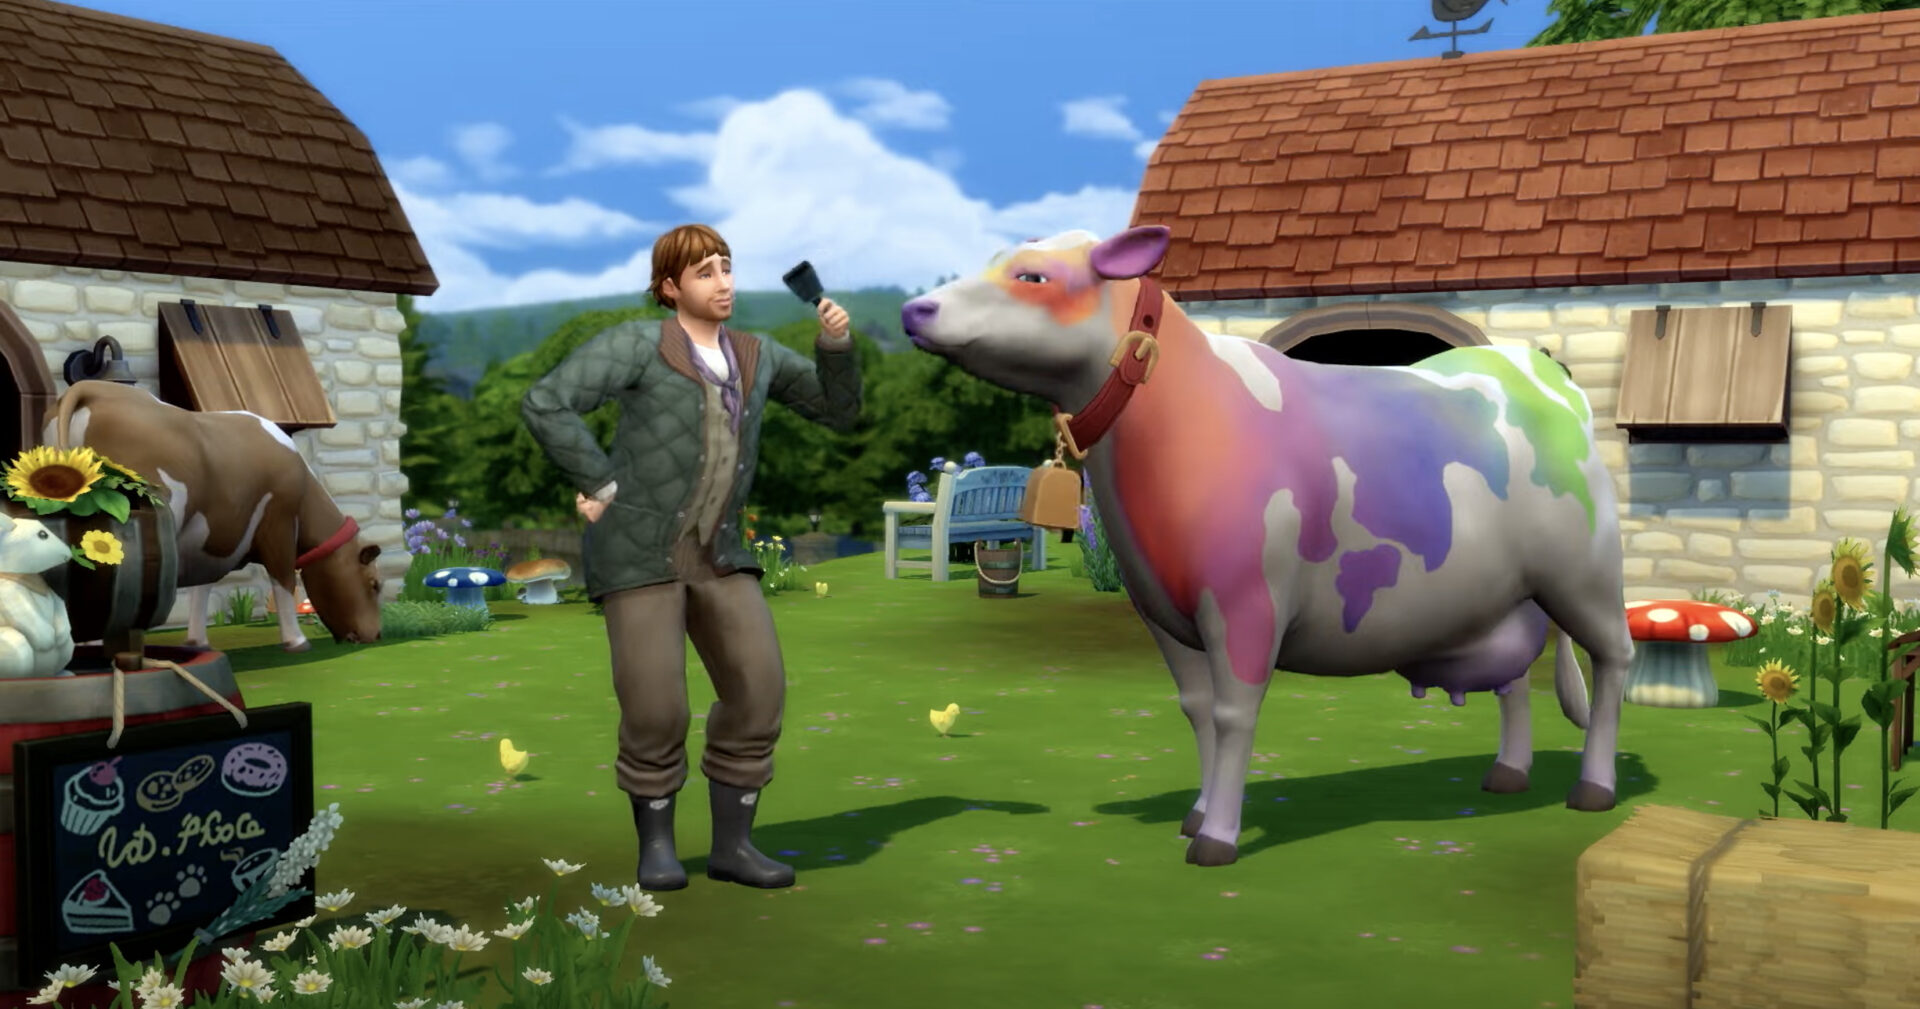 The Sims 4 Cottage Living Just Announced: Farming, Animals, And More